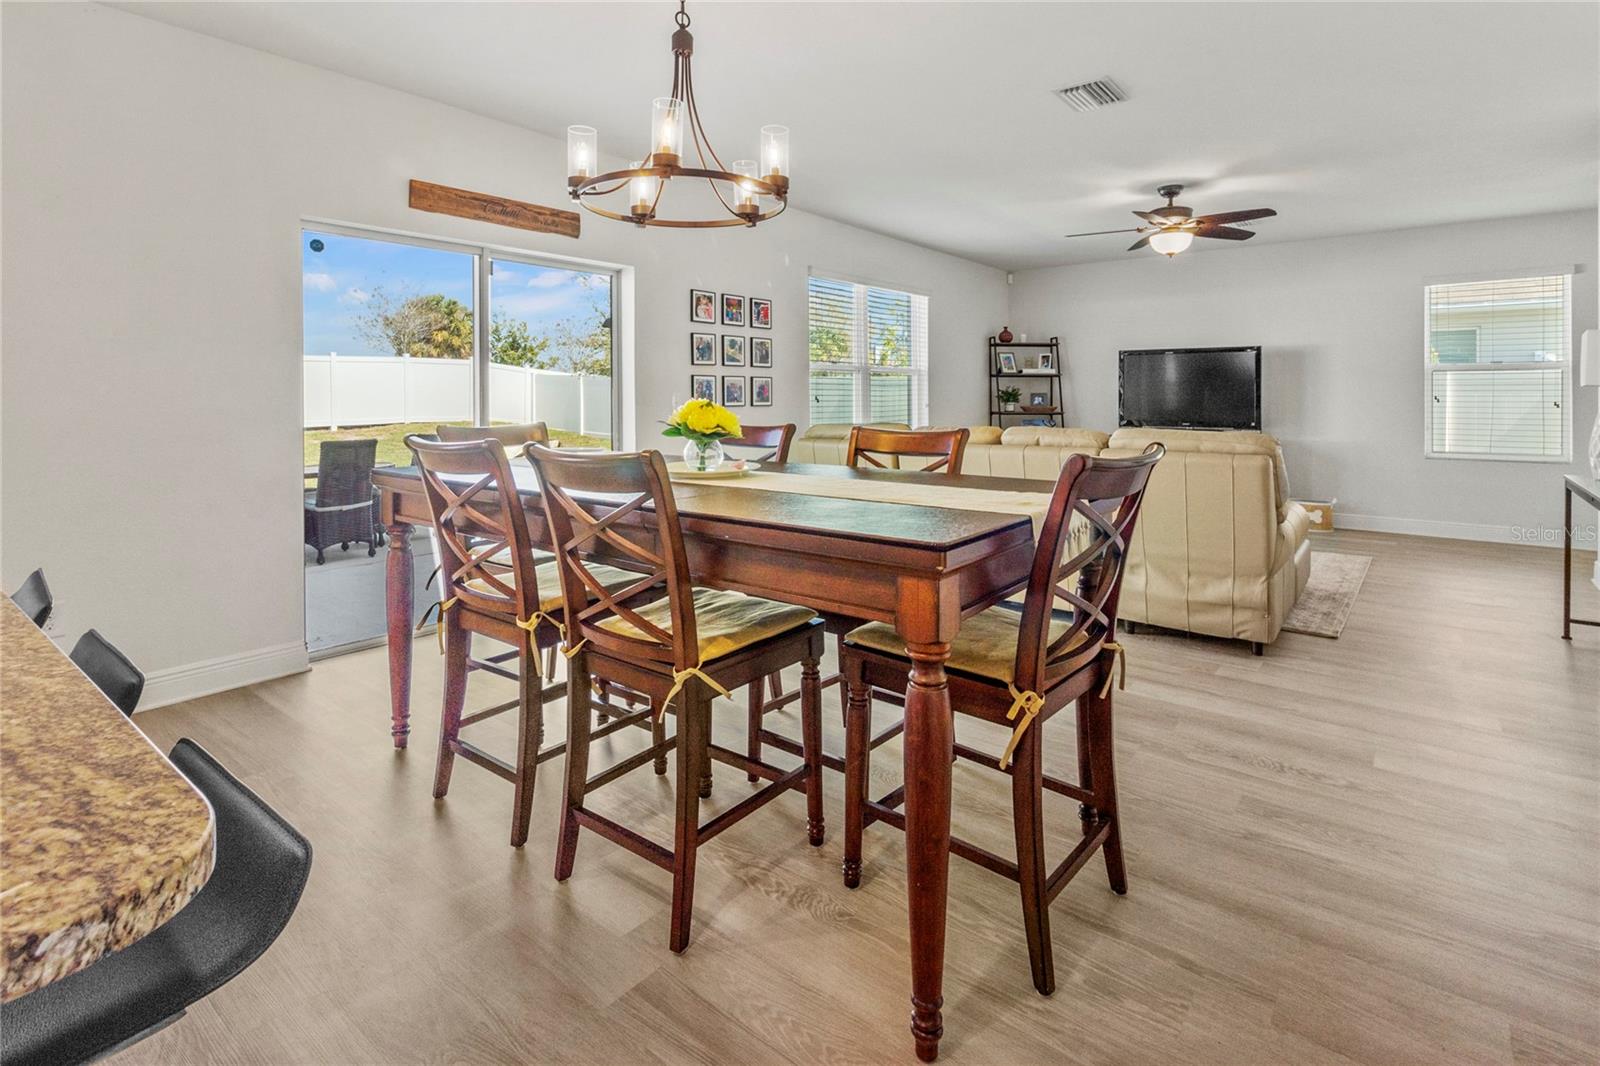 Kitchen, dining and great room - wonderful family space.